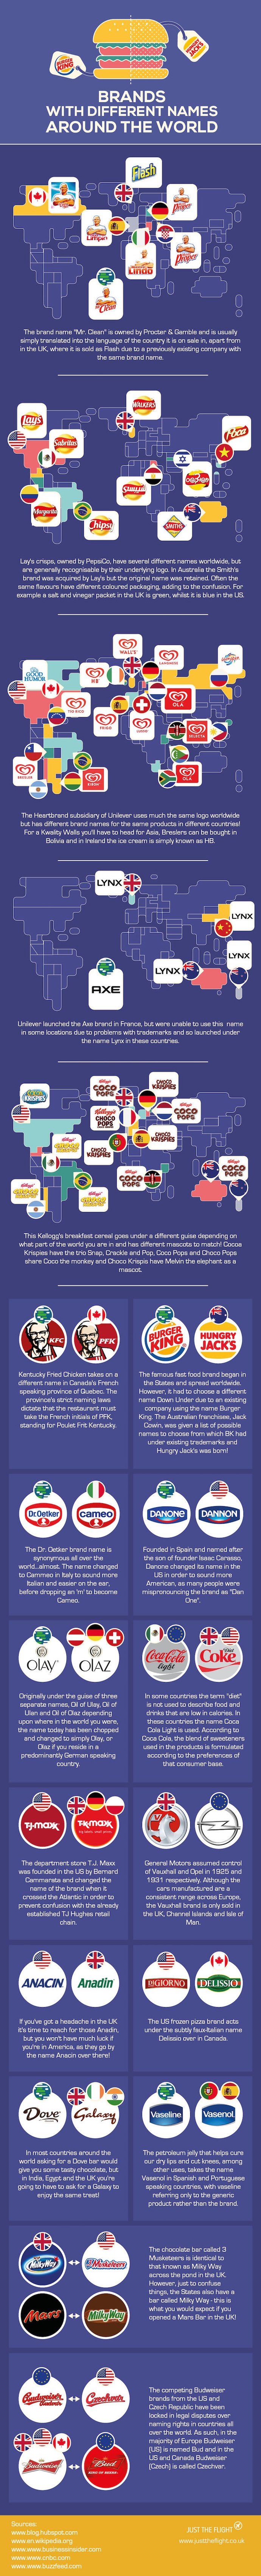 28 Brands That Go By Different Names in Different Countries [Infographic]